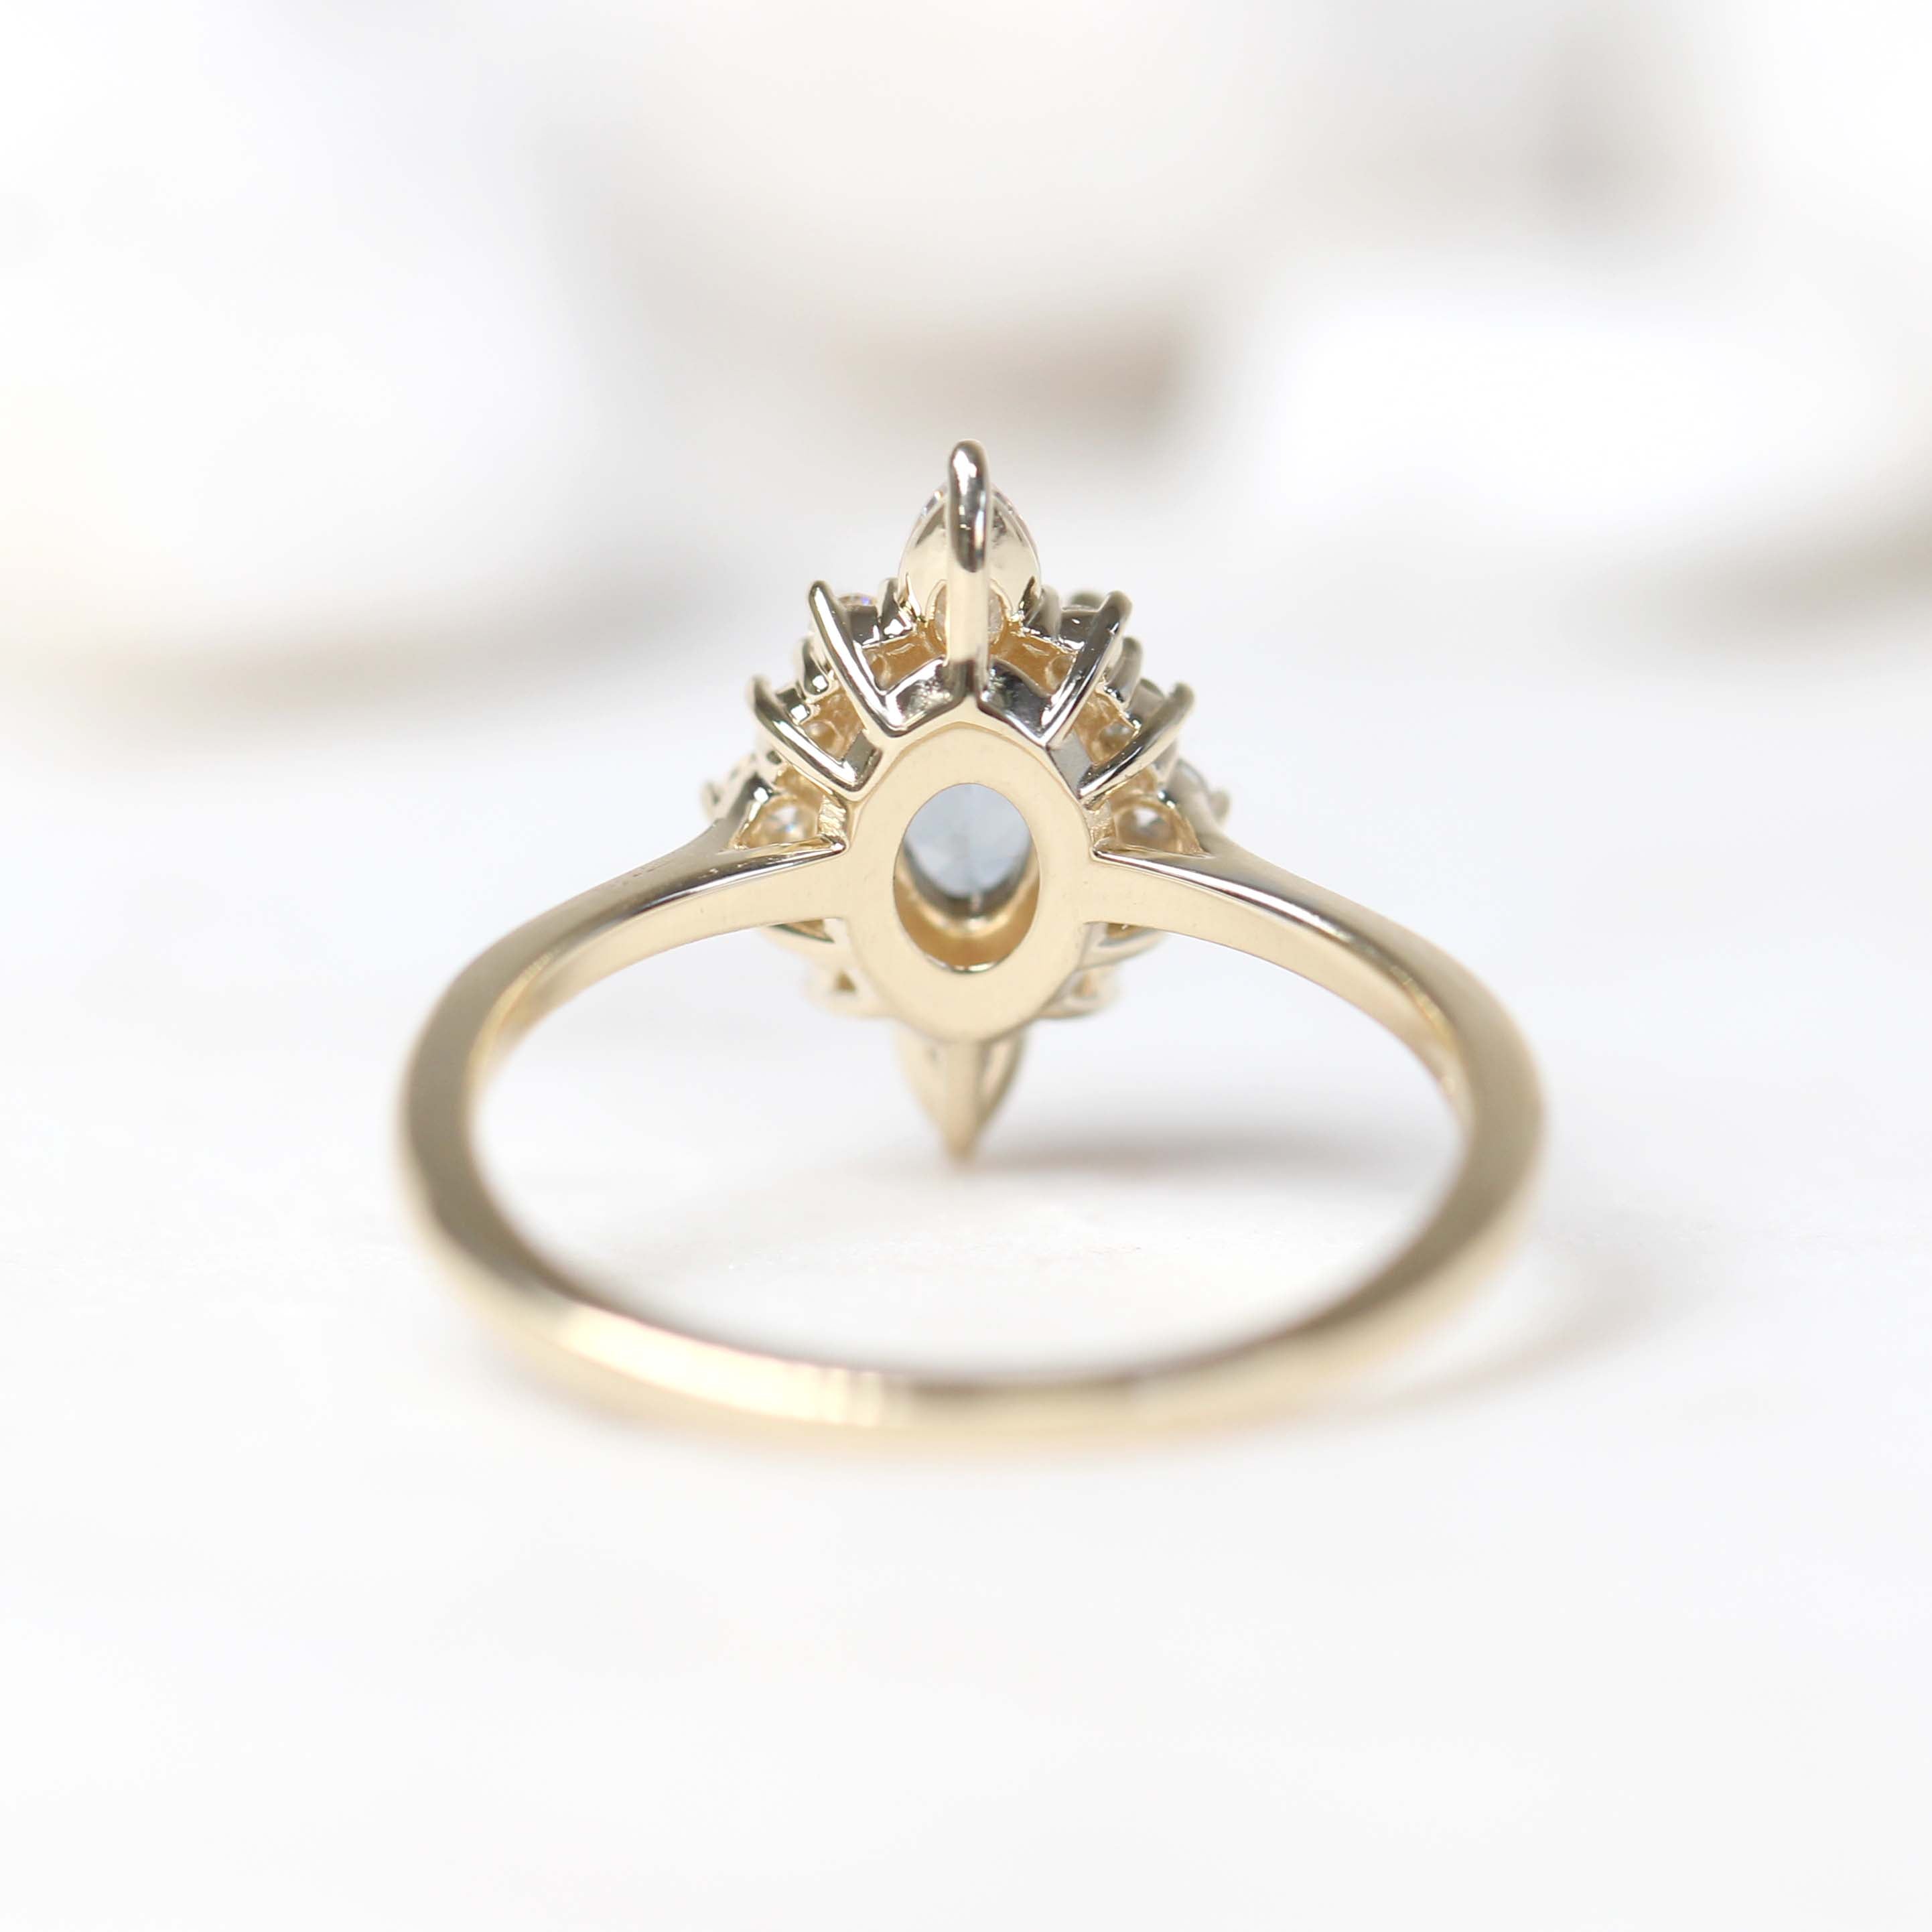 Noelle Ring with a 0.88 Carat Blue Gray Oval Spinel and White Accent Moissanites in 14k Yellow Gold - Ready to Size and Ship - Midwinter Co. Alternative Bridal Rings and Modern Fine Jewelry